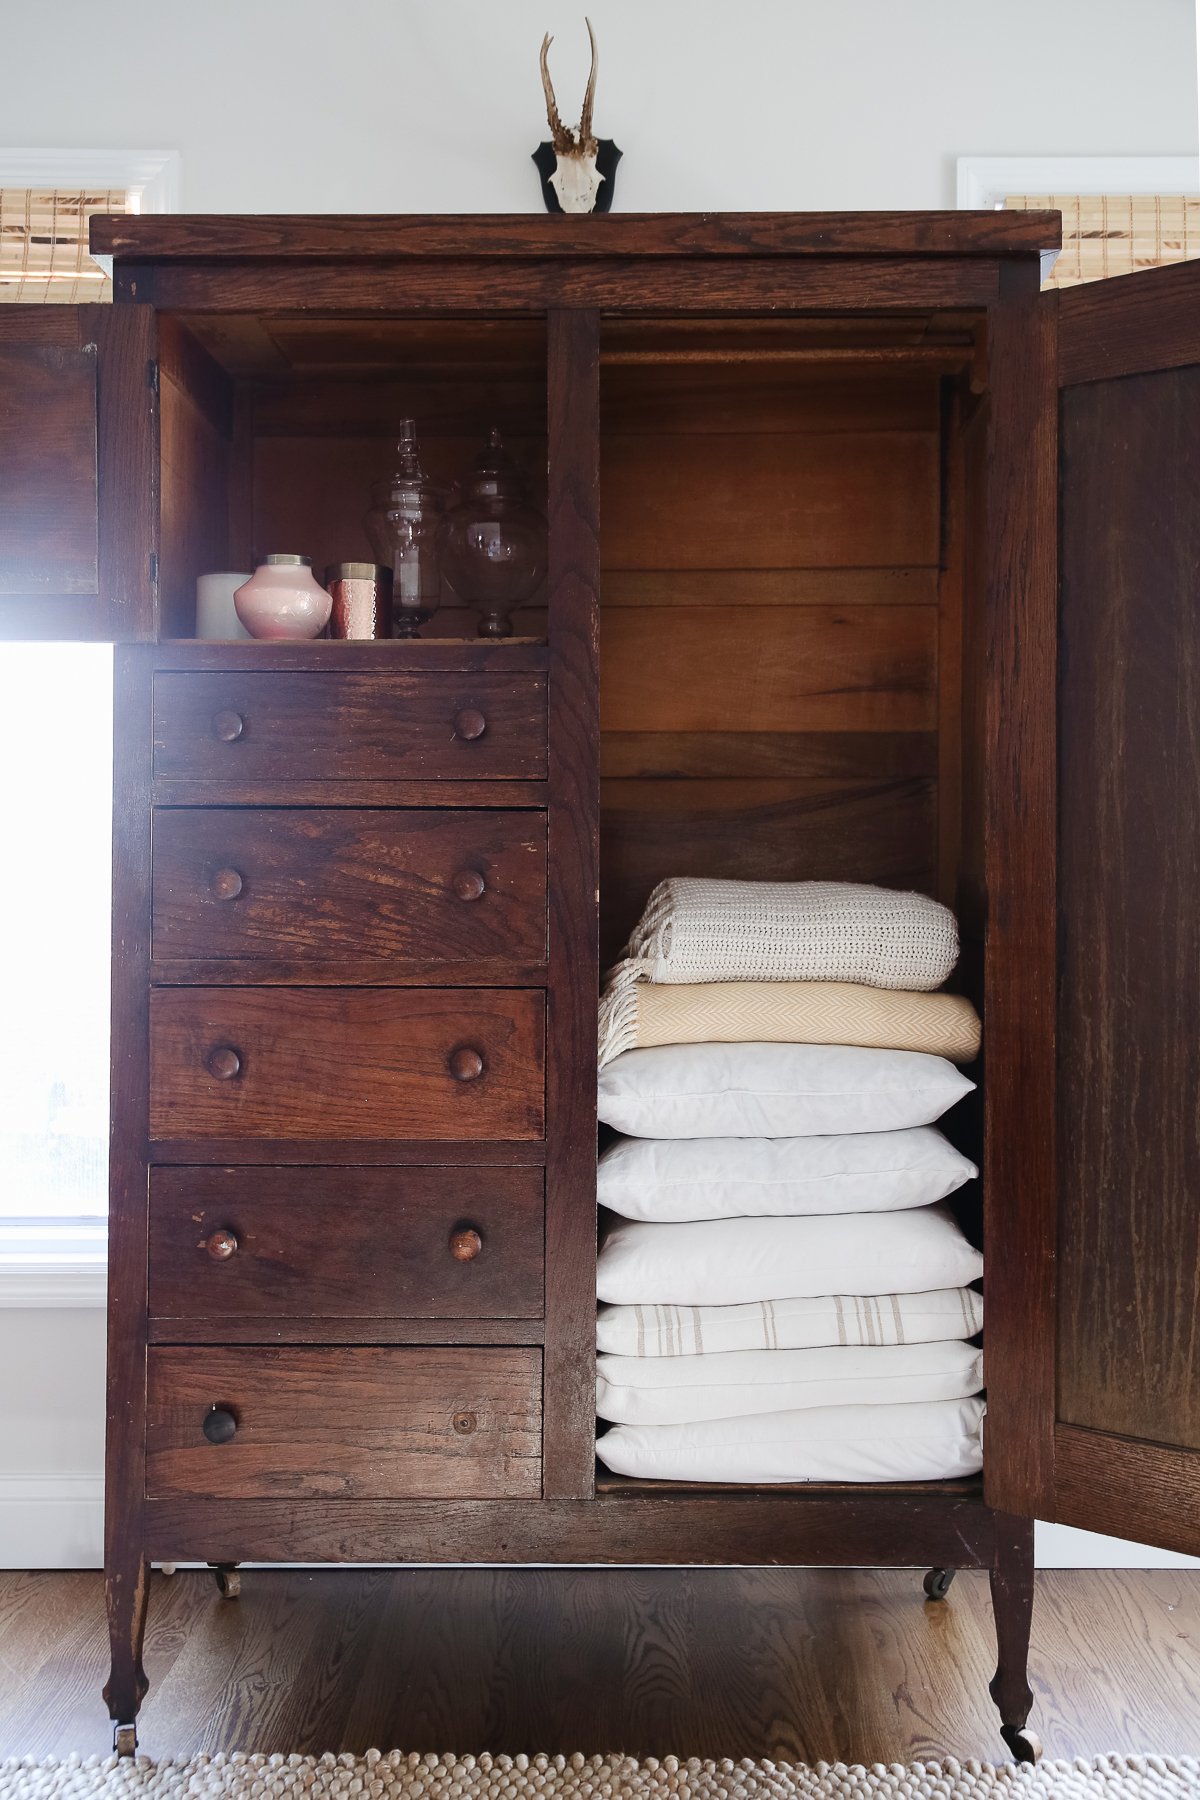 A dark wood linen cabinet in a family room space, with the door opened to reveal the interior storage.